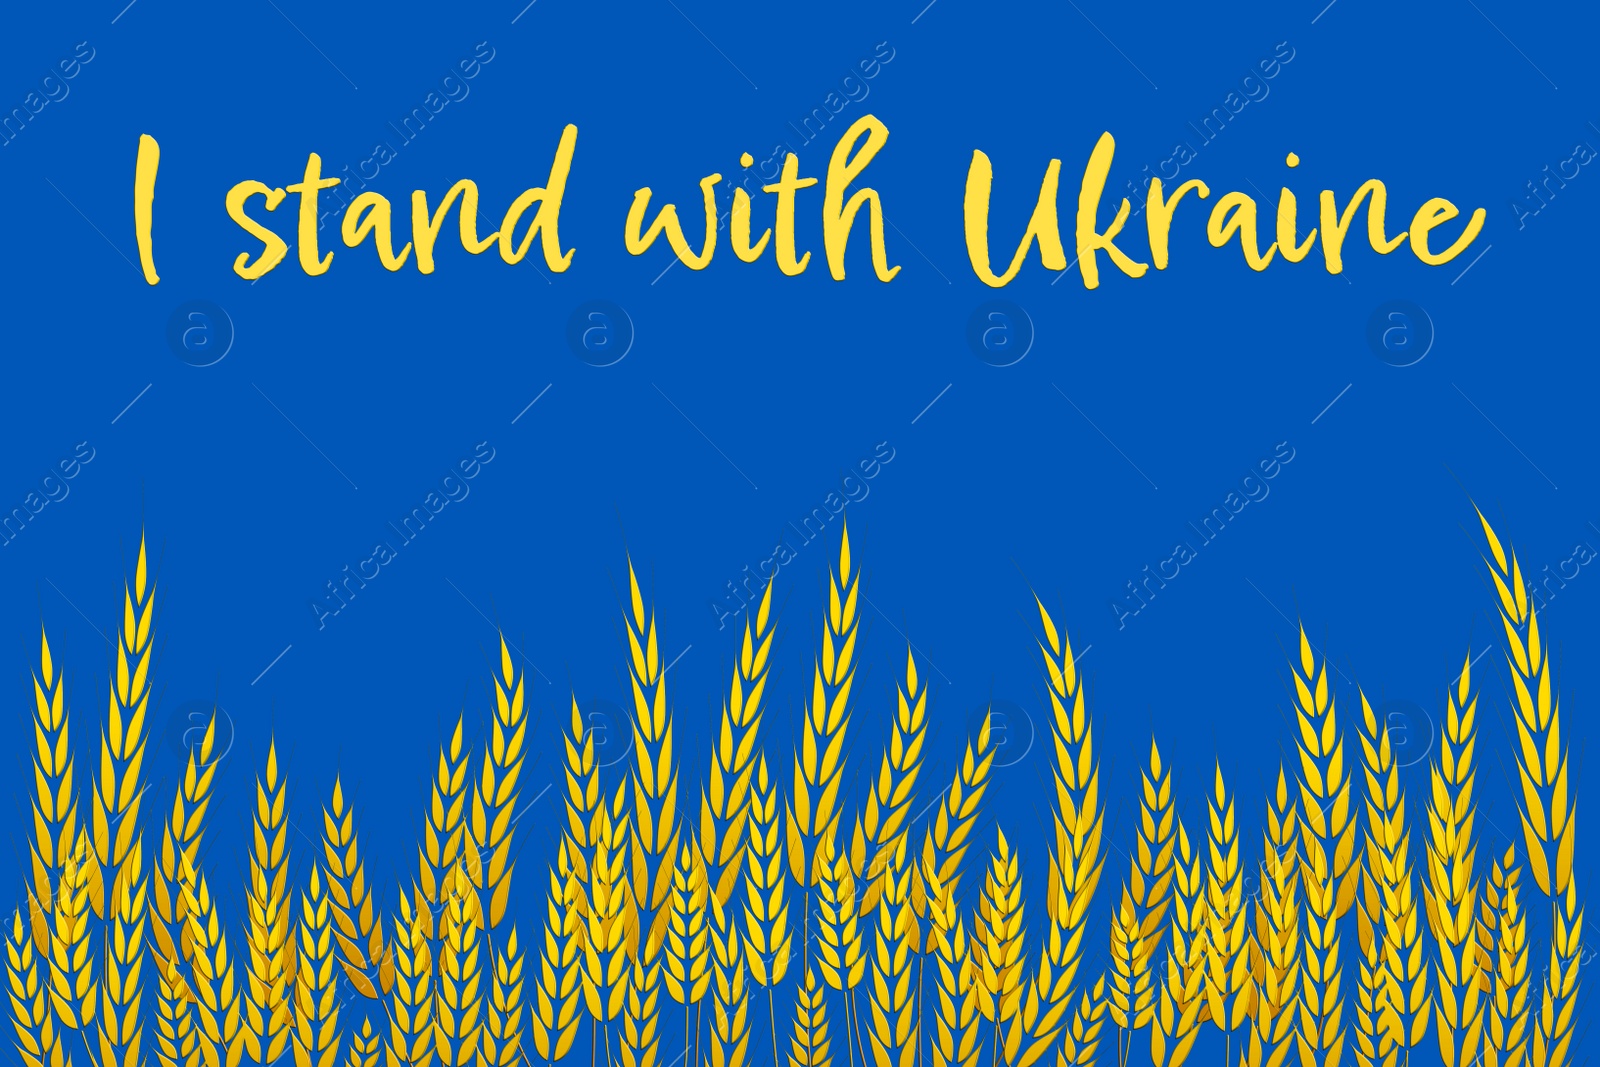 Illustration of I Stand With Ukraine. Phrase over illustration of wheat field on light blue background